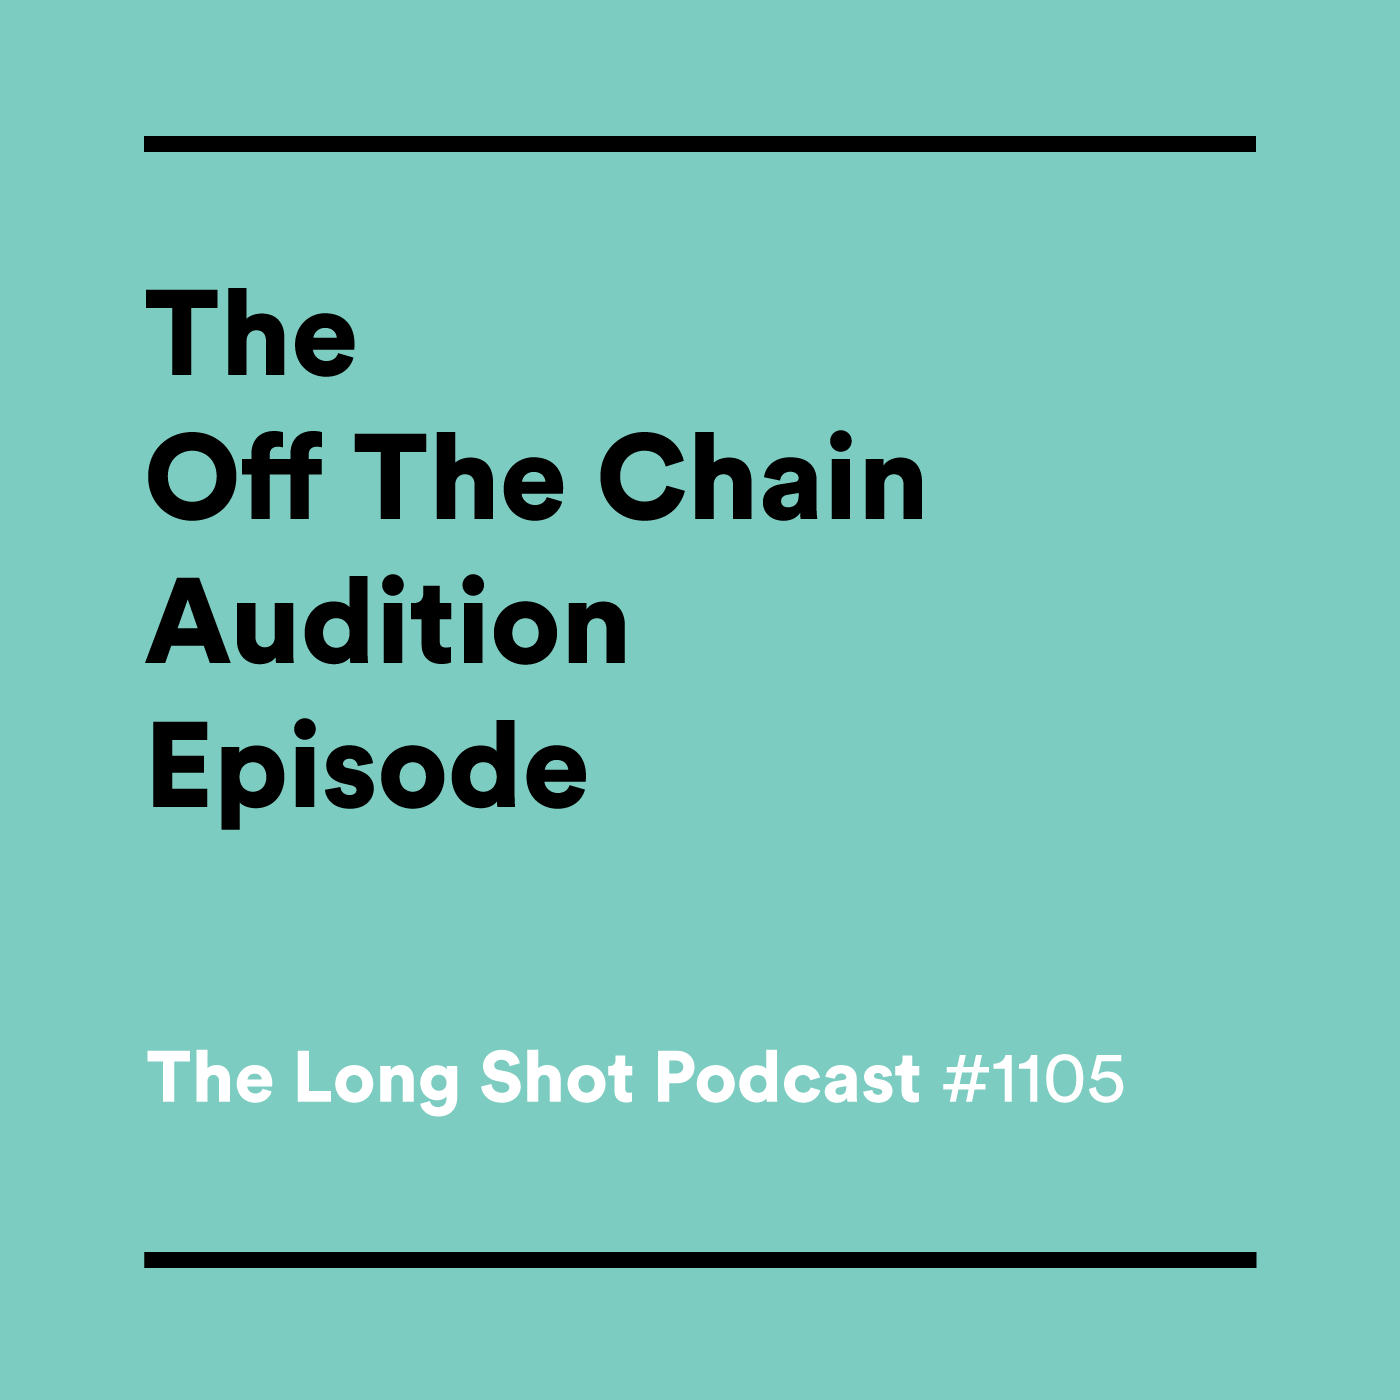 #1105 The Off The Chain Audition Episode with Jen Kirkman